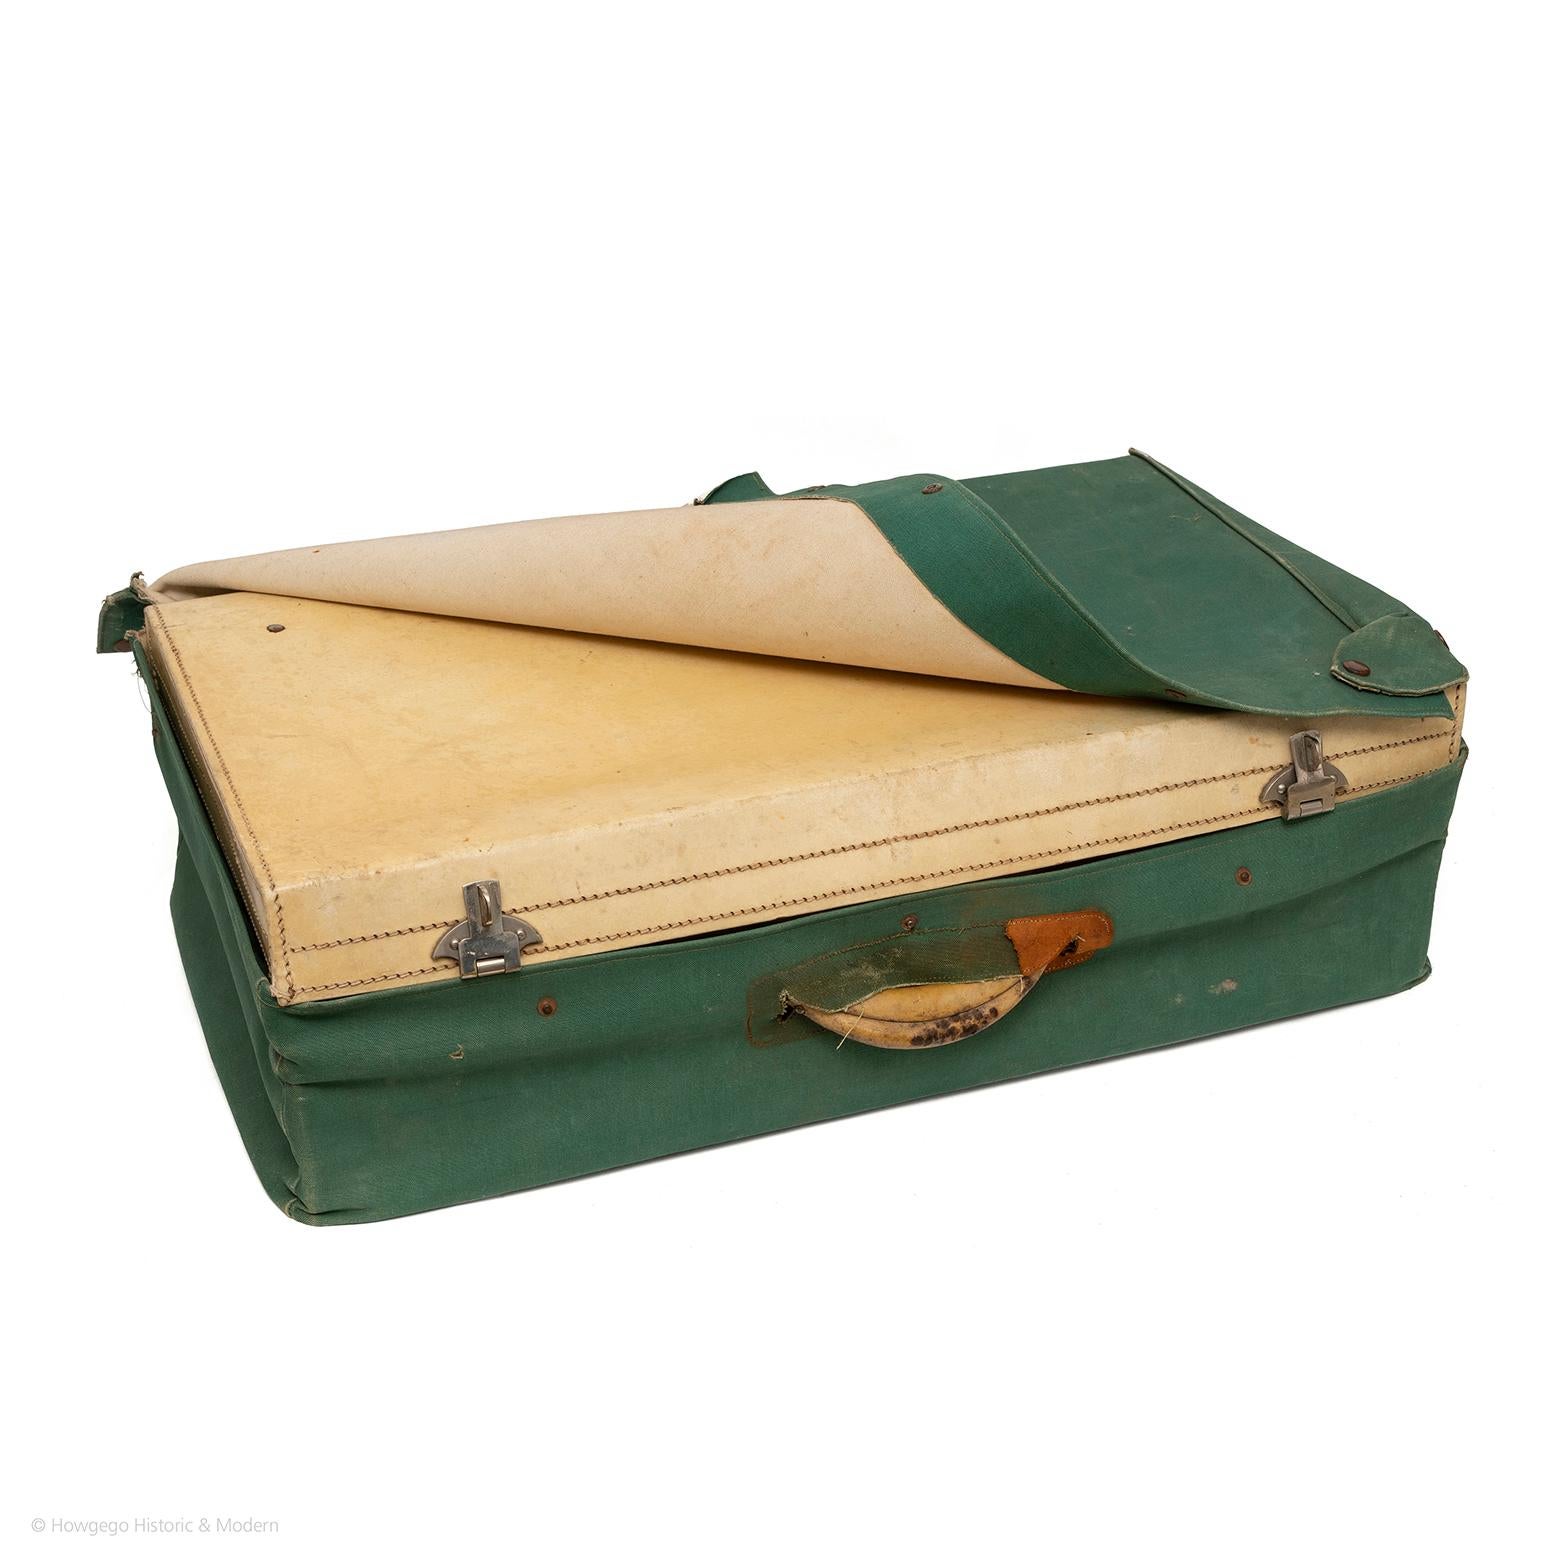 1920's French, vellum suitcase with nickel locking fittings and key in rare, exceptional condition protected by its original green canvas fitted cover which is very unusual as these are normally worn away or lost. The only visible external wear is